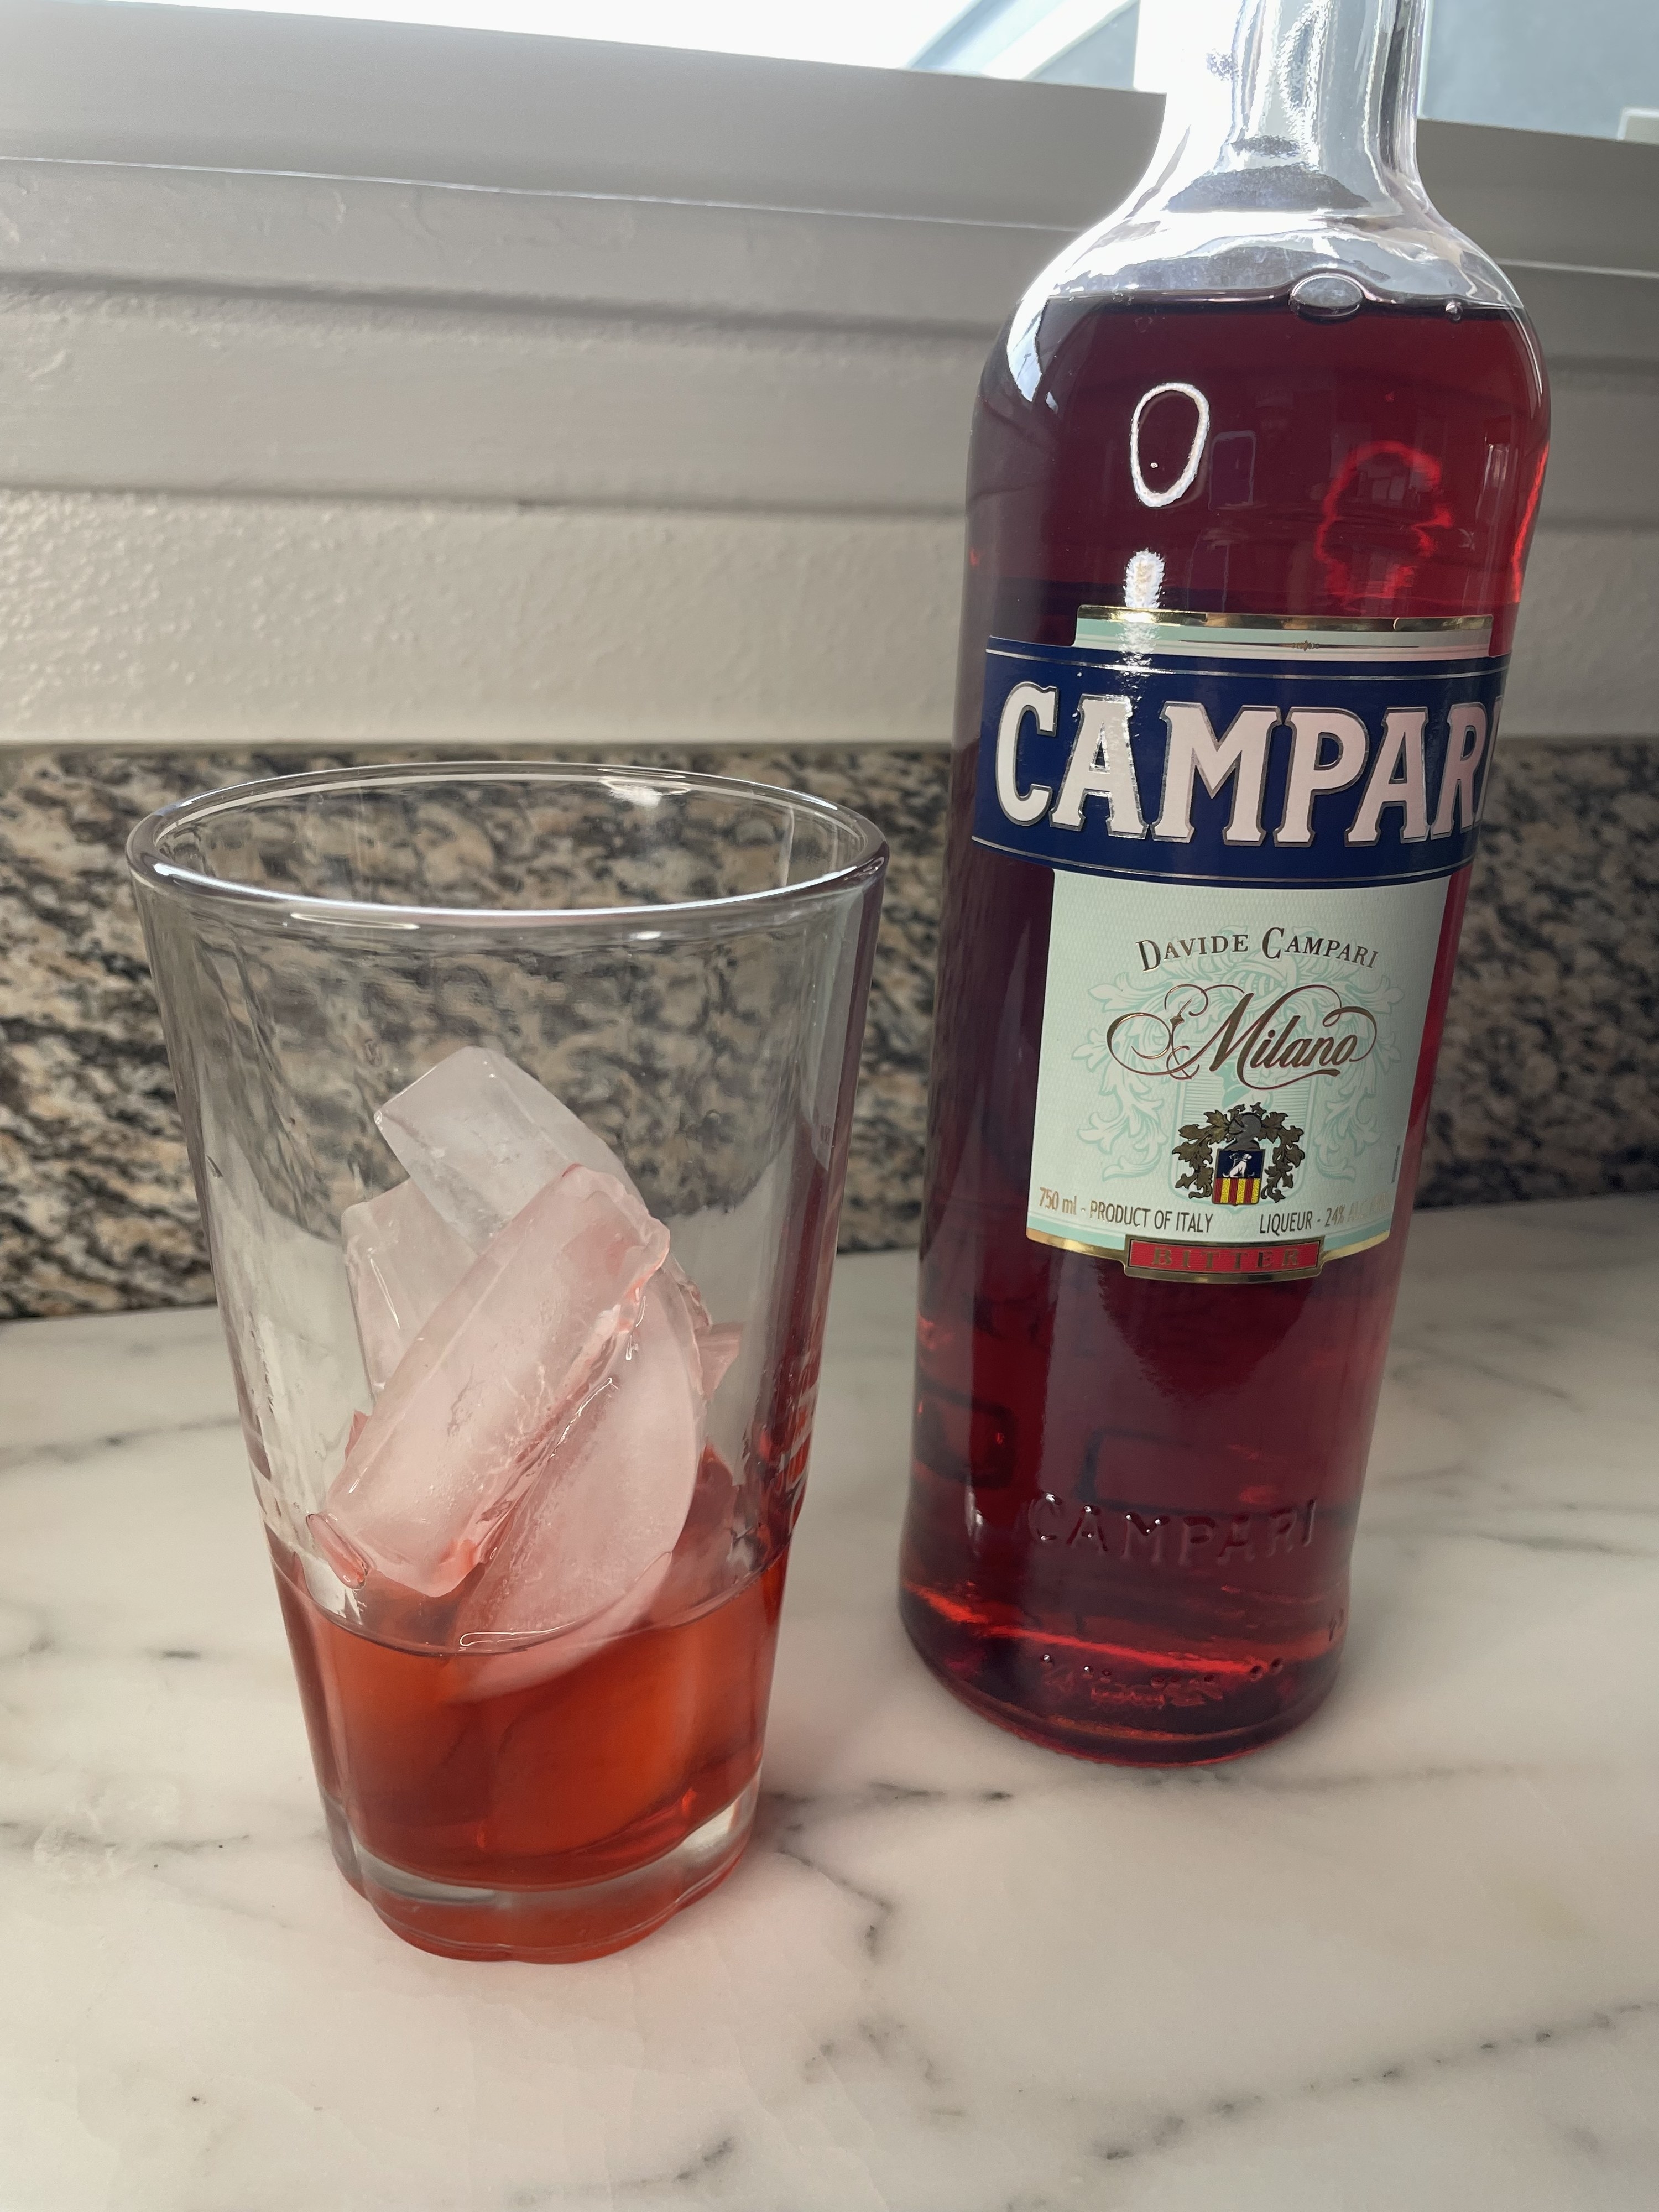 A cup of ice with Campari next to the bottle